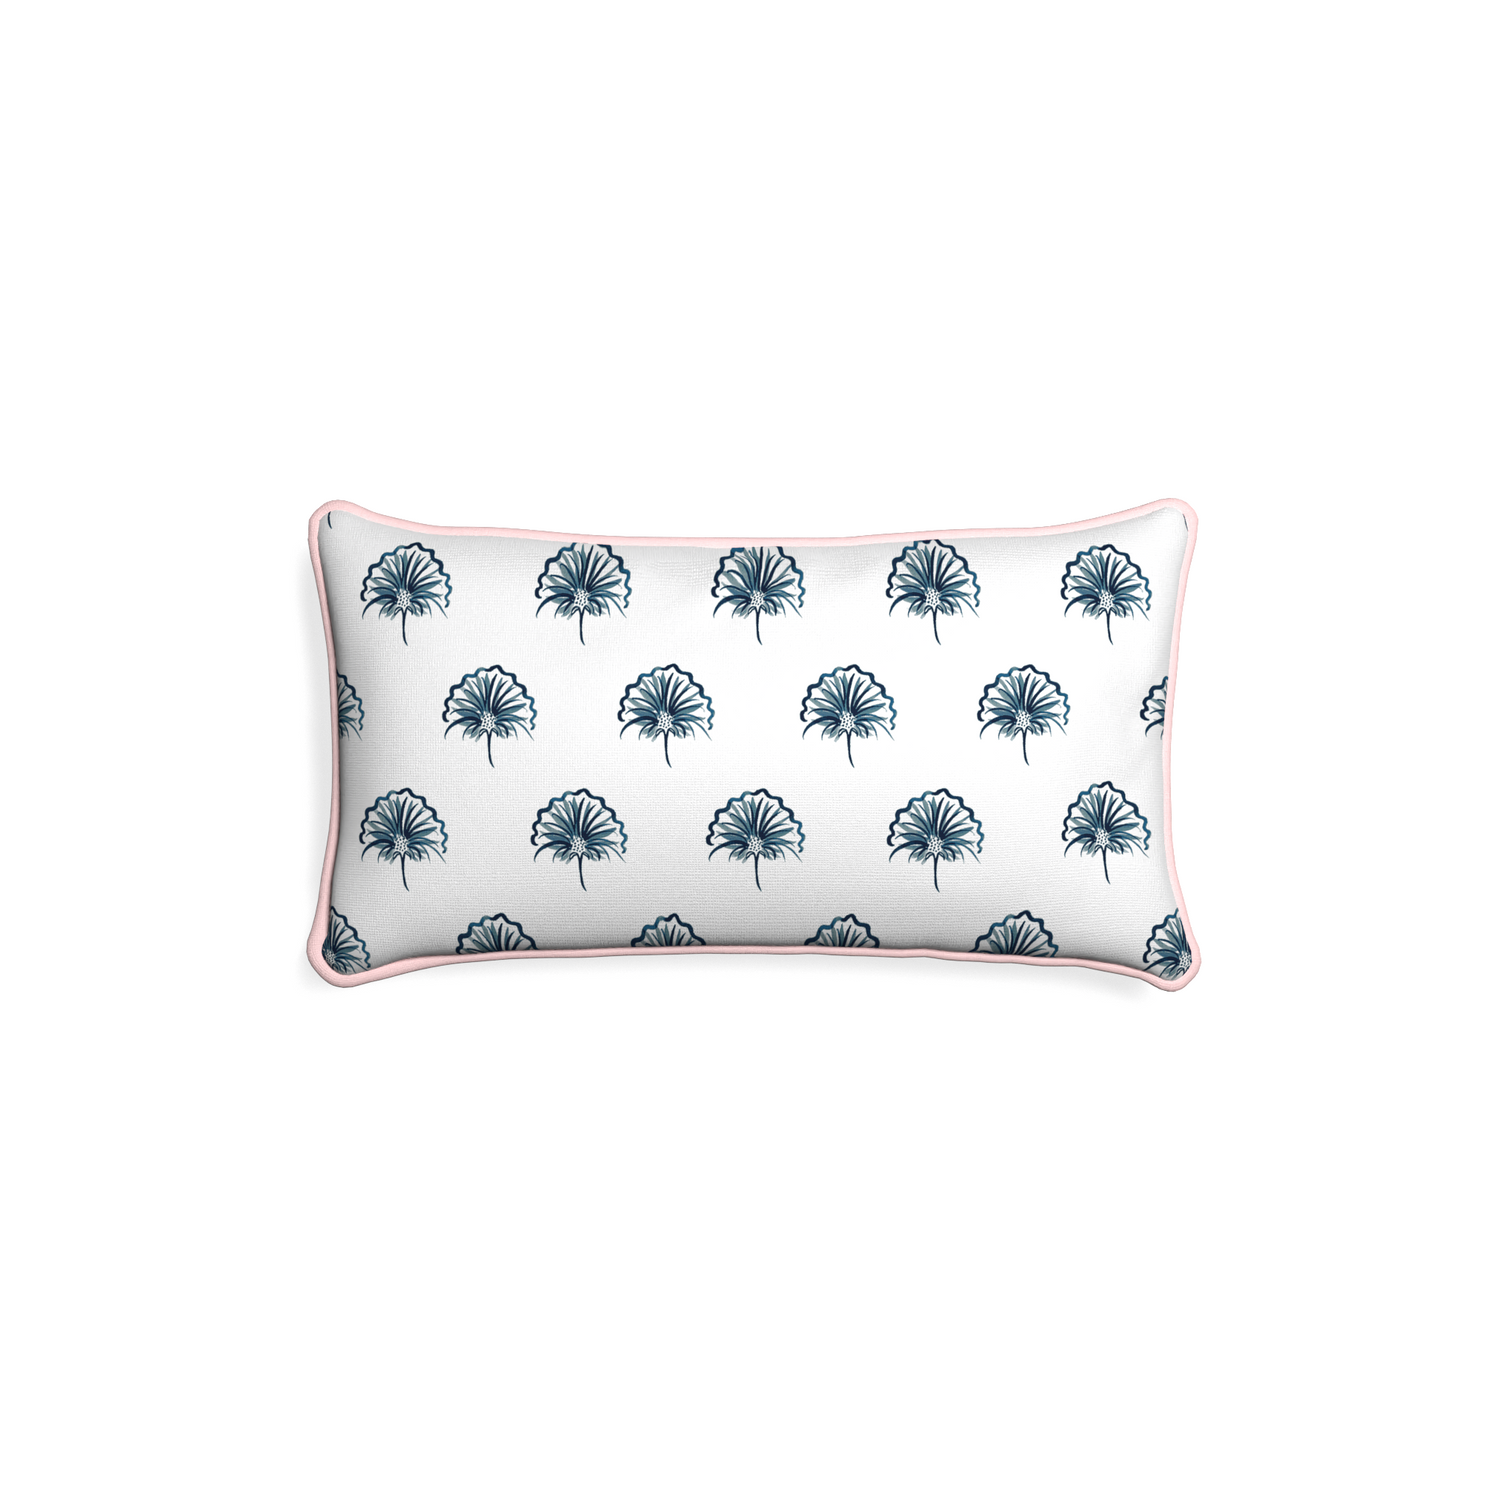 Petite-lumbar penelope midnight custom floral navypillow with petal piping on white background